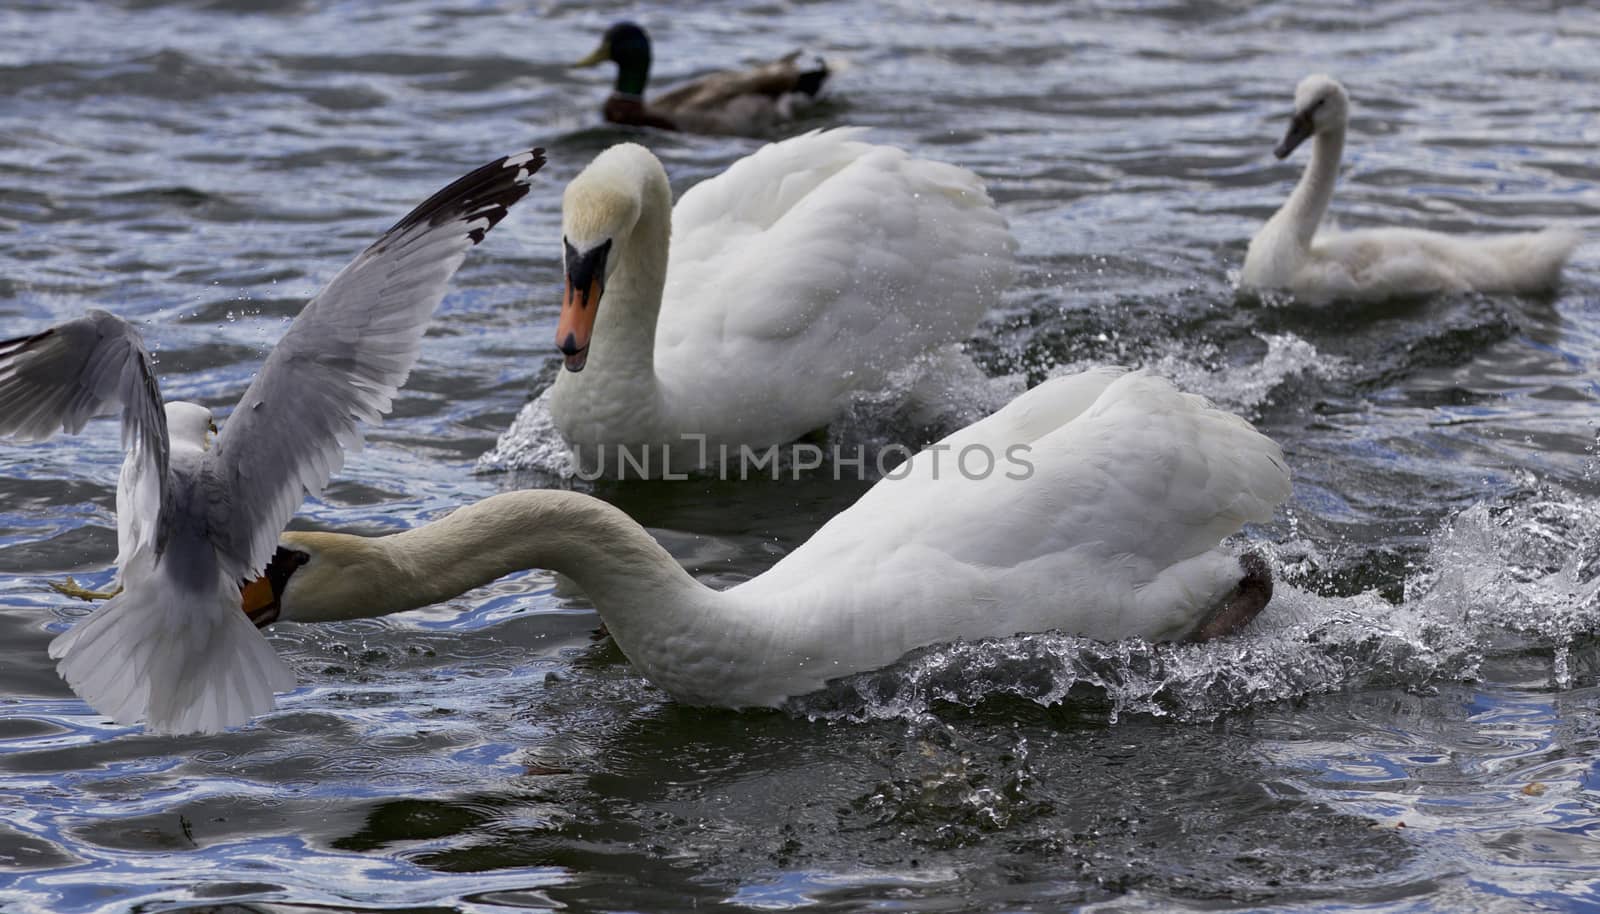 Amazing moment with a swan caught a gull